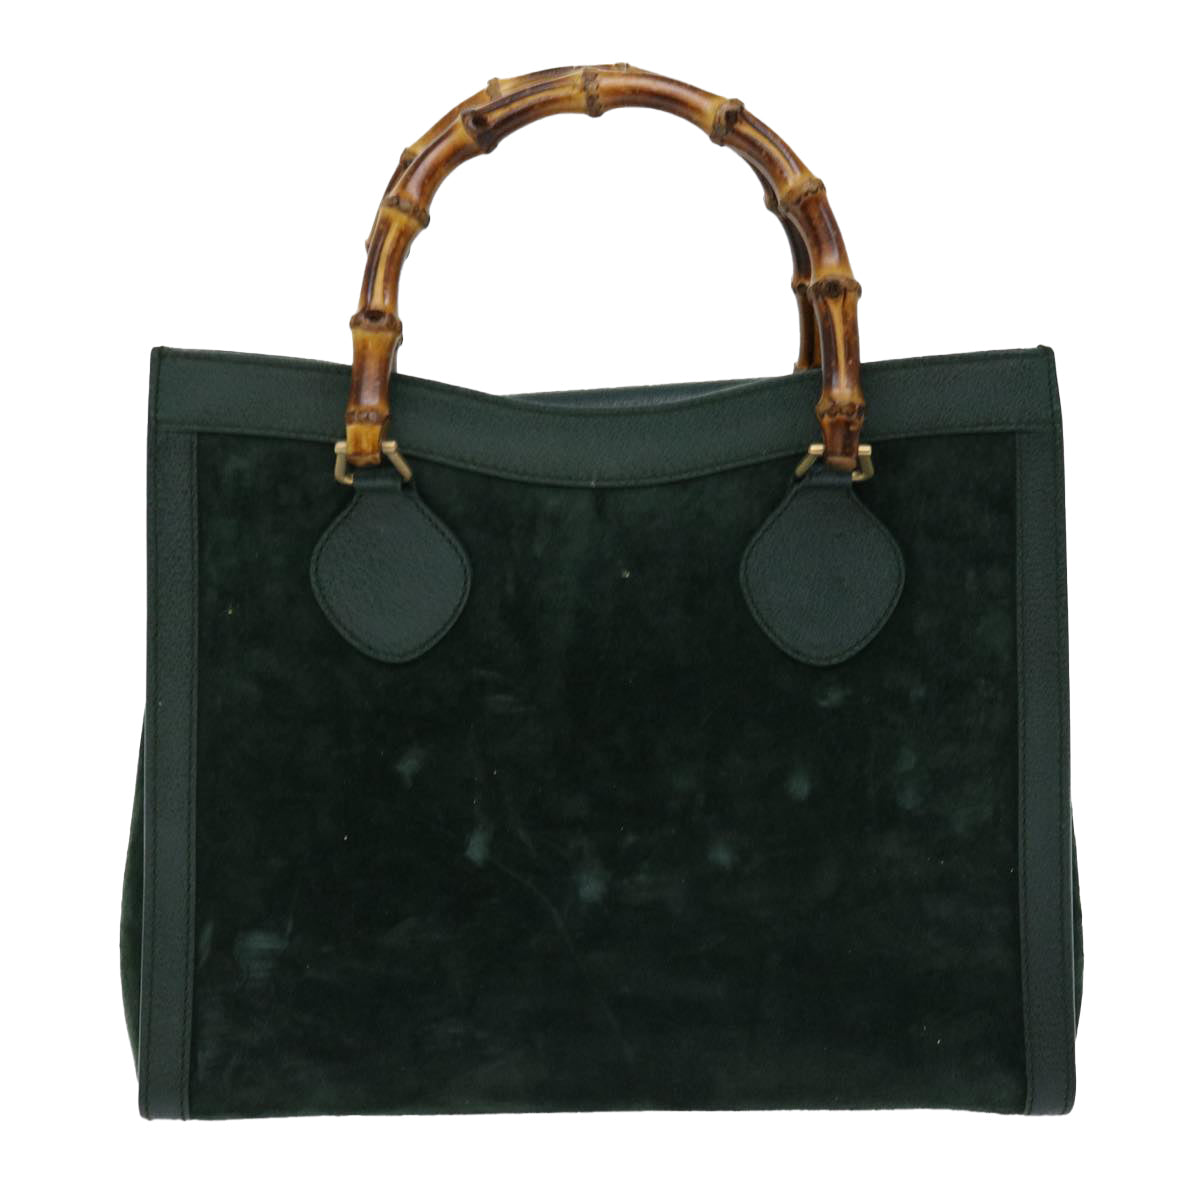 GUCCI Bamboo Tote Bag Suede Green 002 2853 0260 0 Auth ep3721 - 0